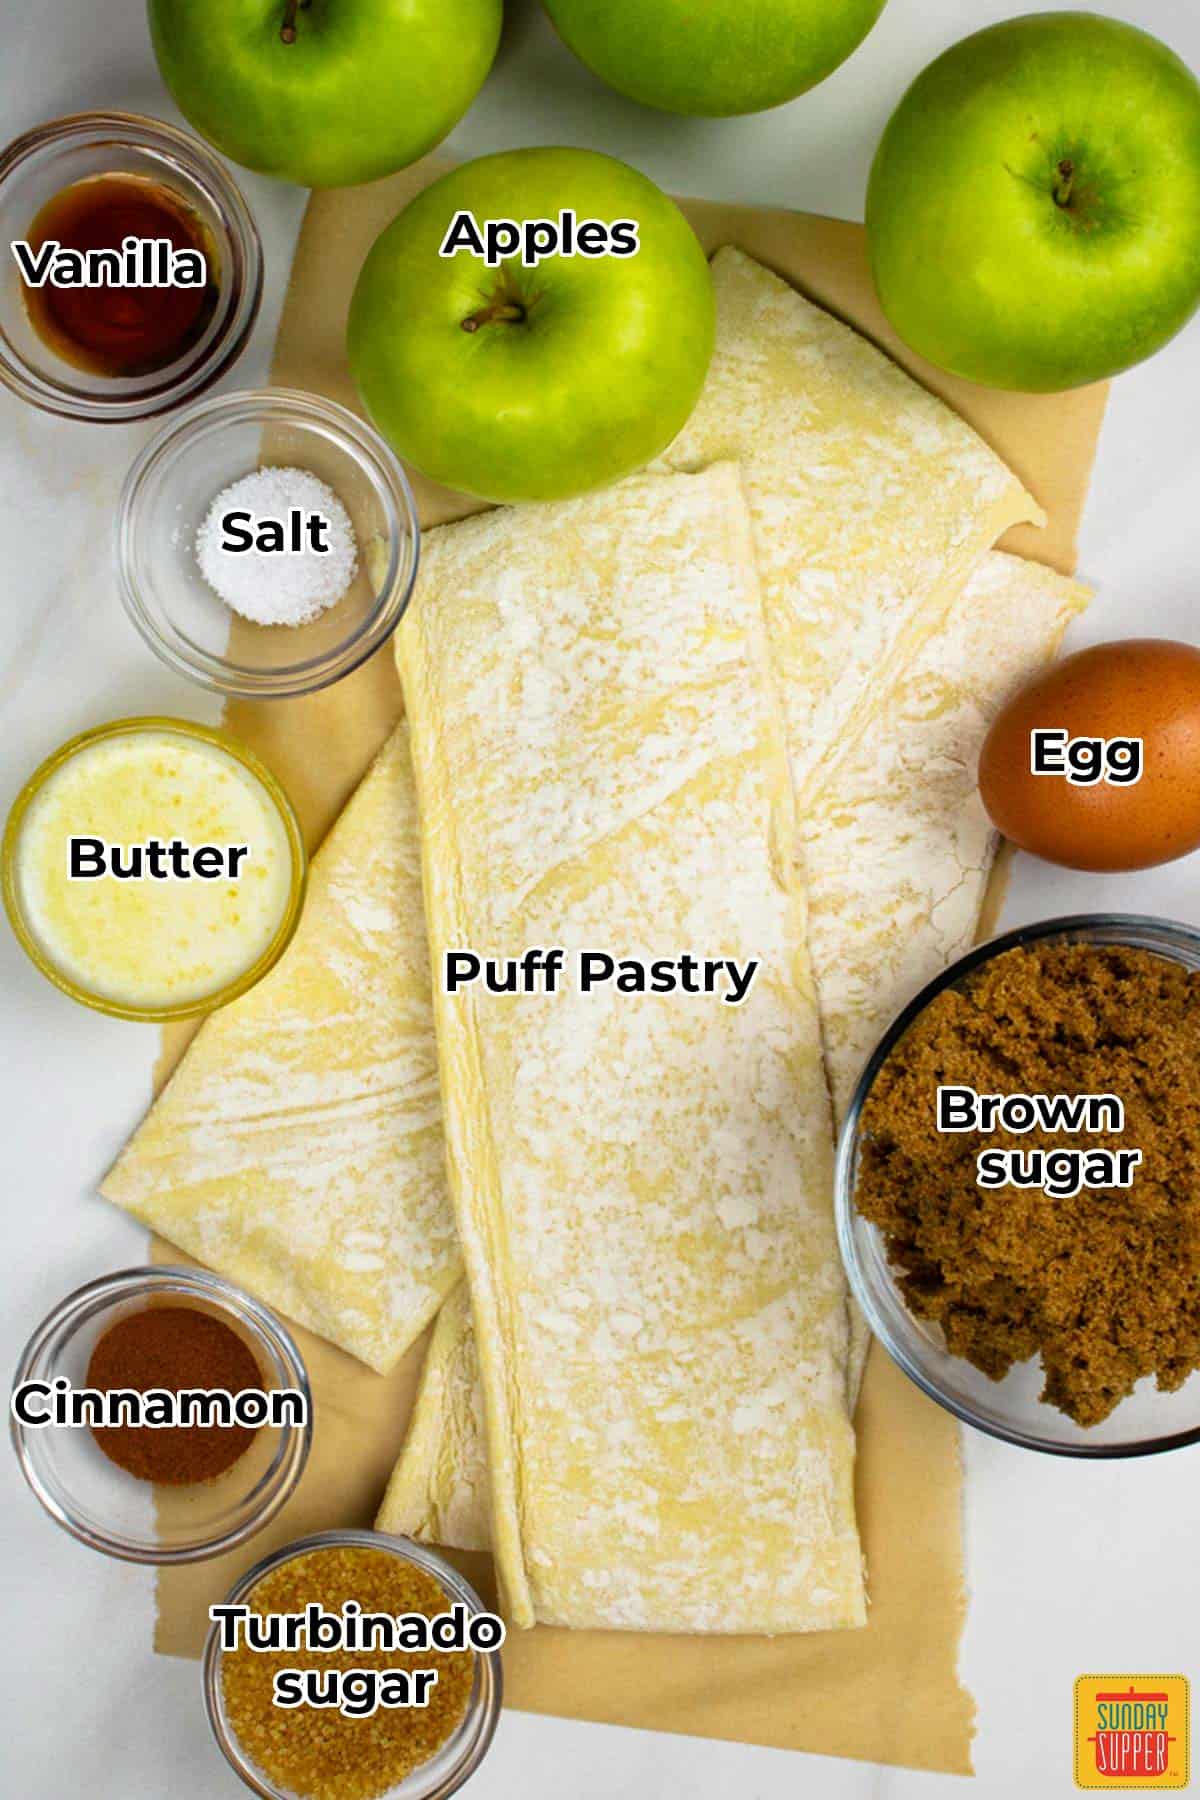 the ingredients for puff pastry separated out and labeled